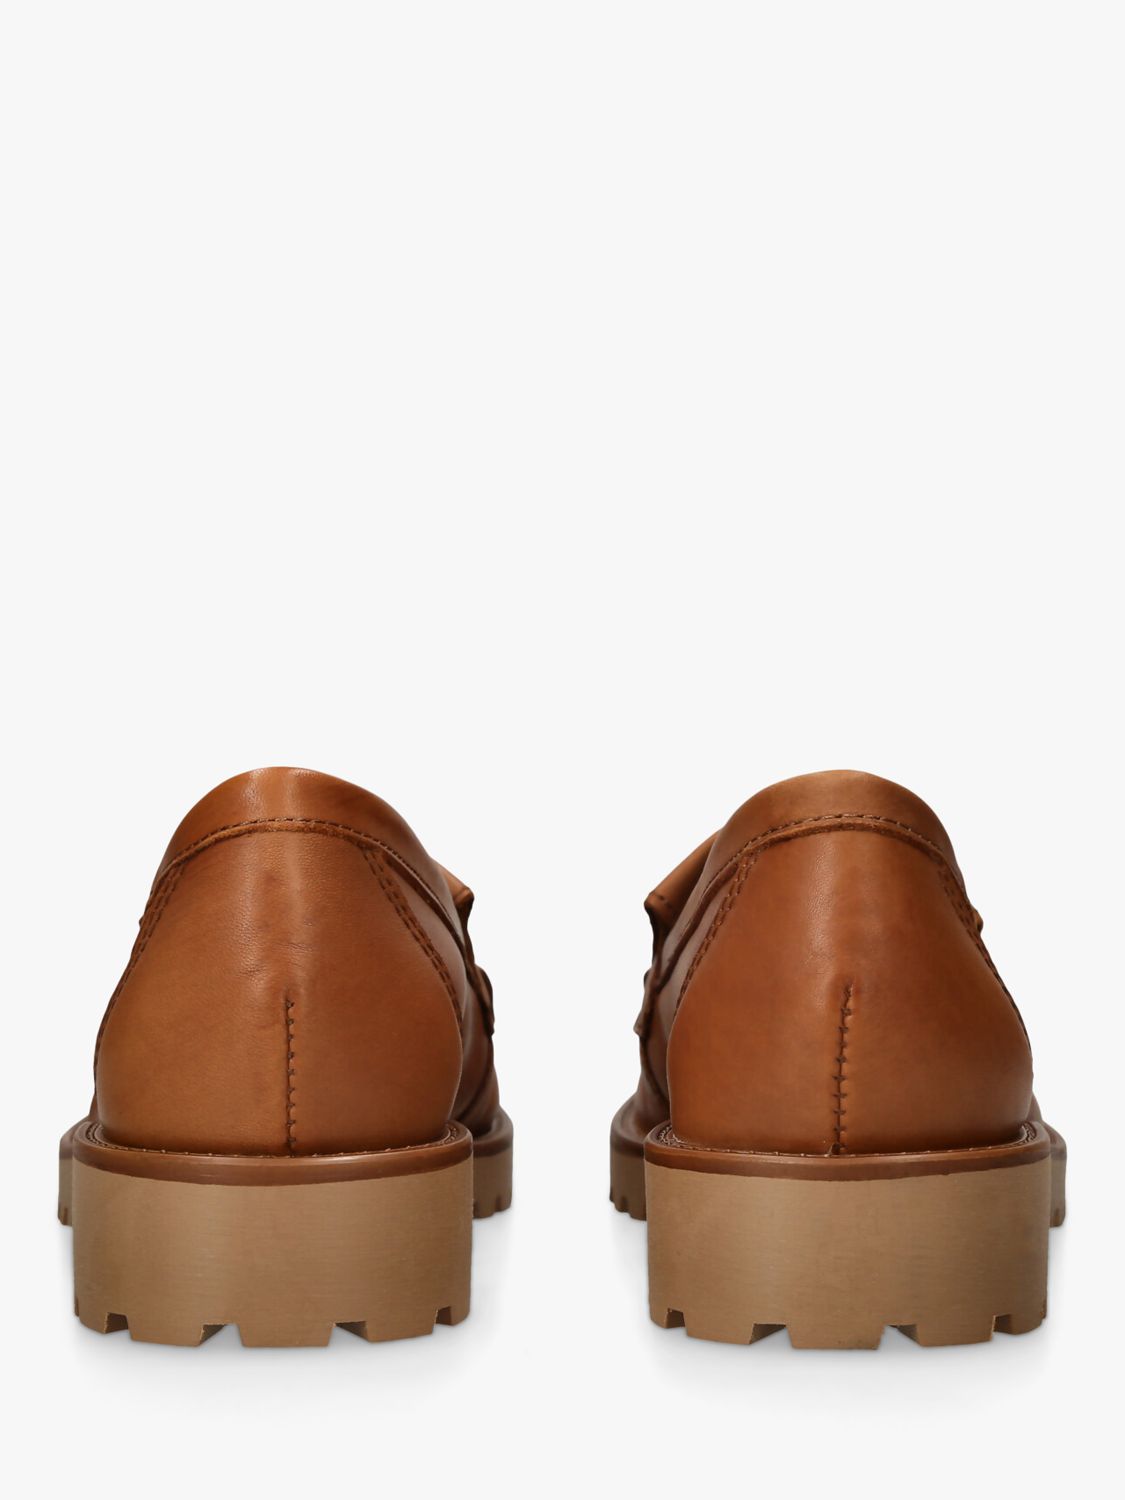 Kurt Geiger London Olympia Leather Loafers, Brown Tan, 4